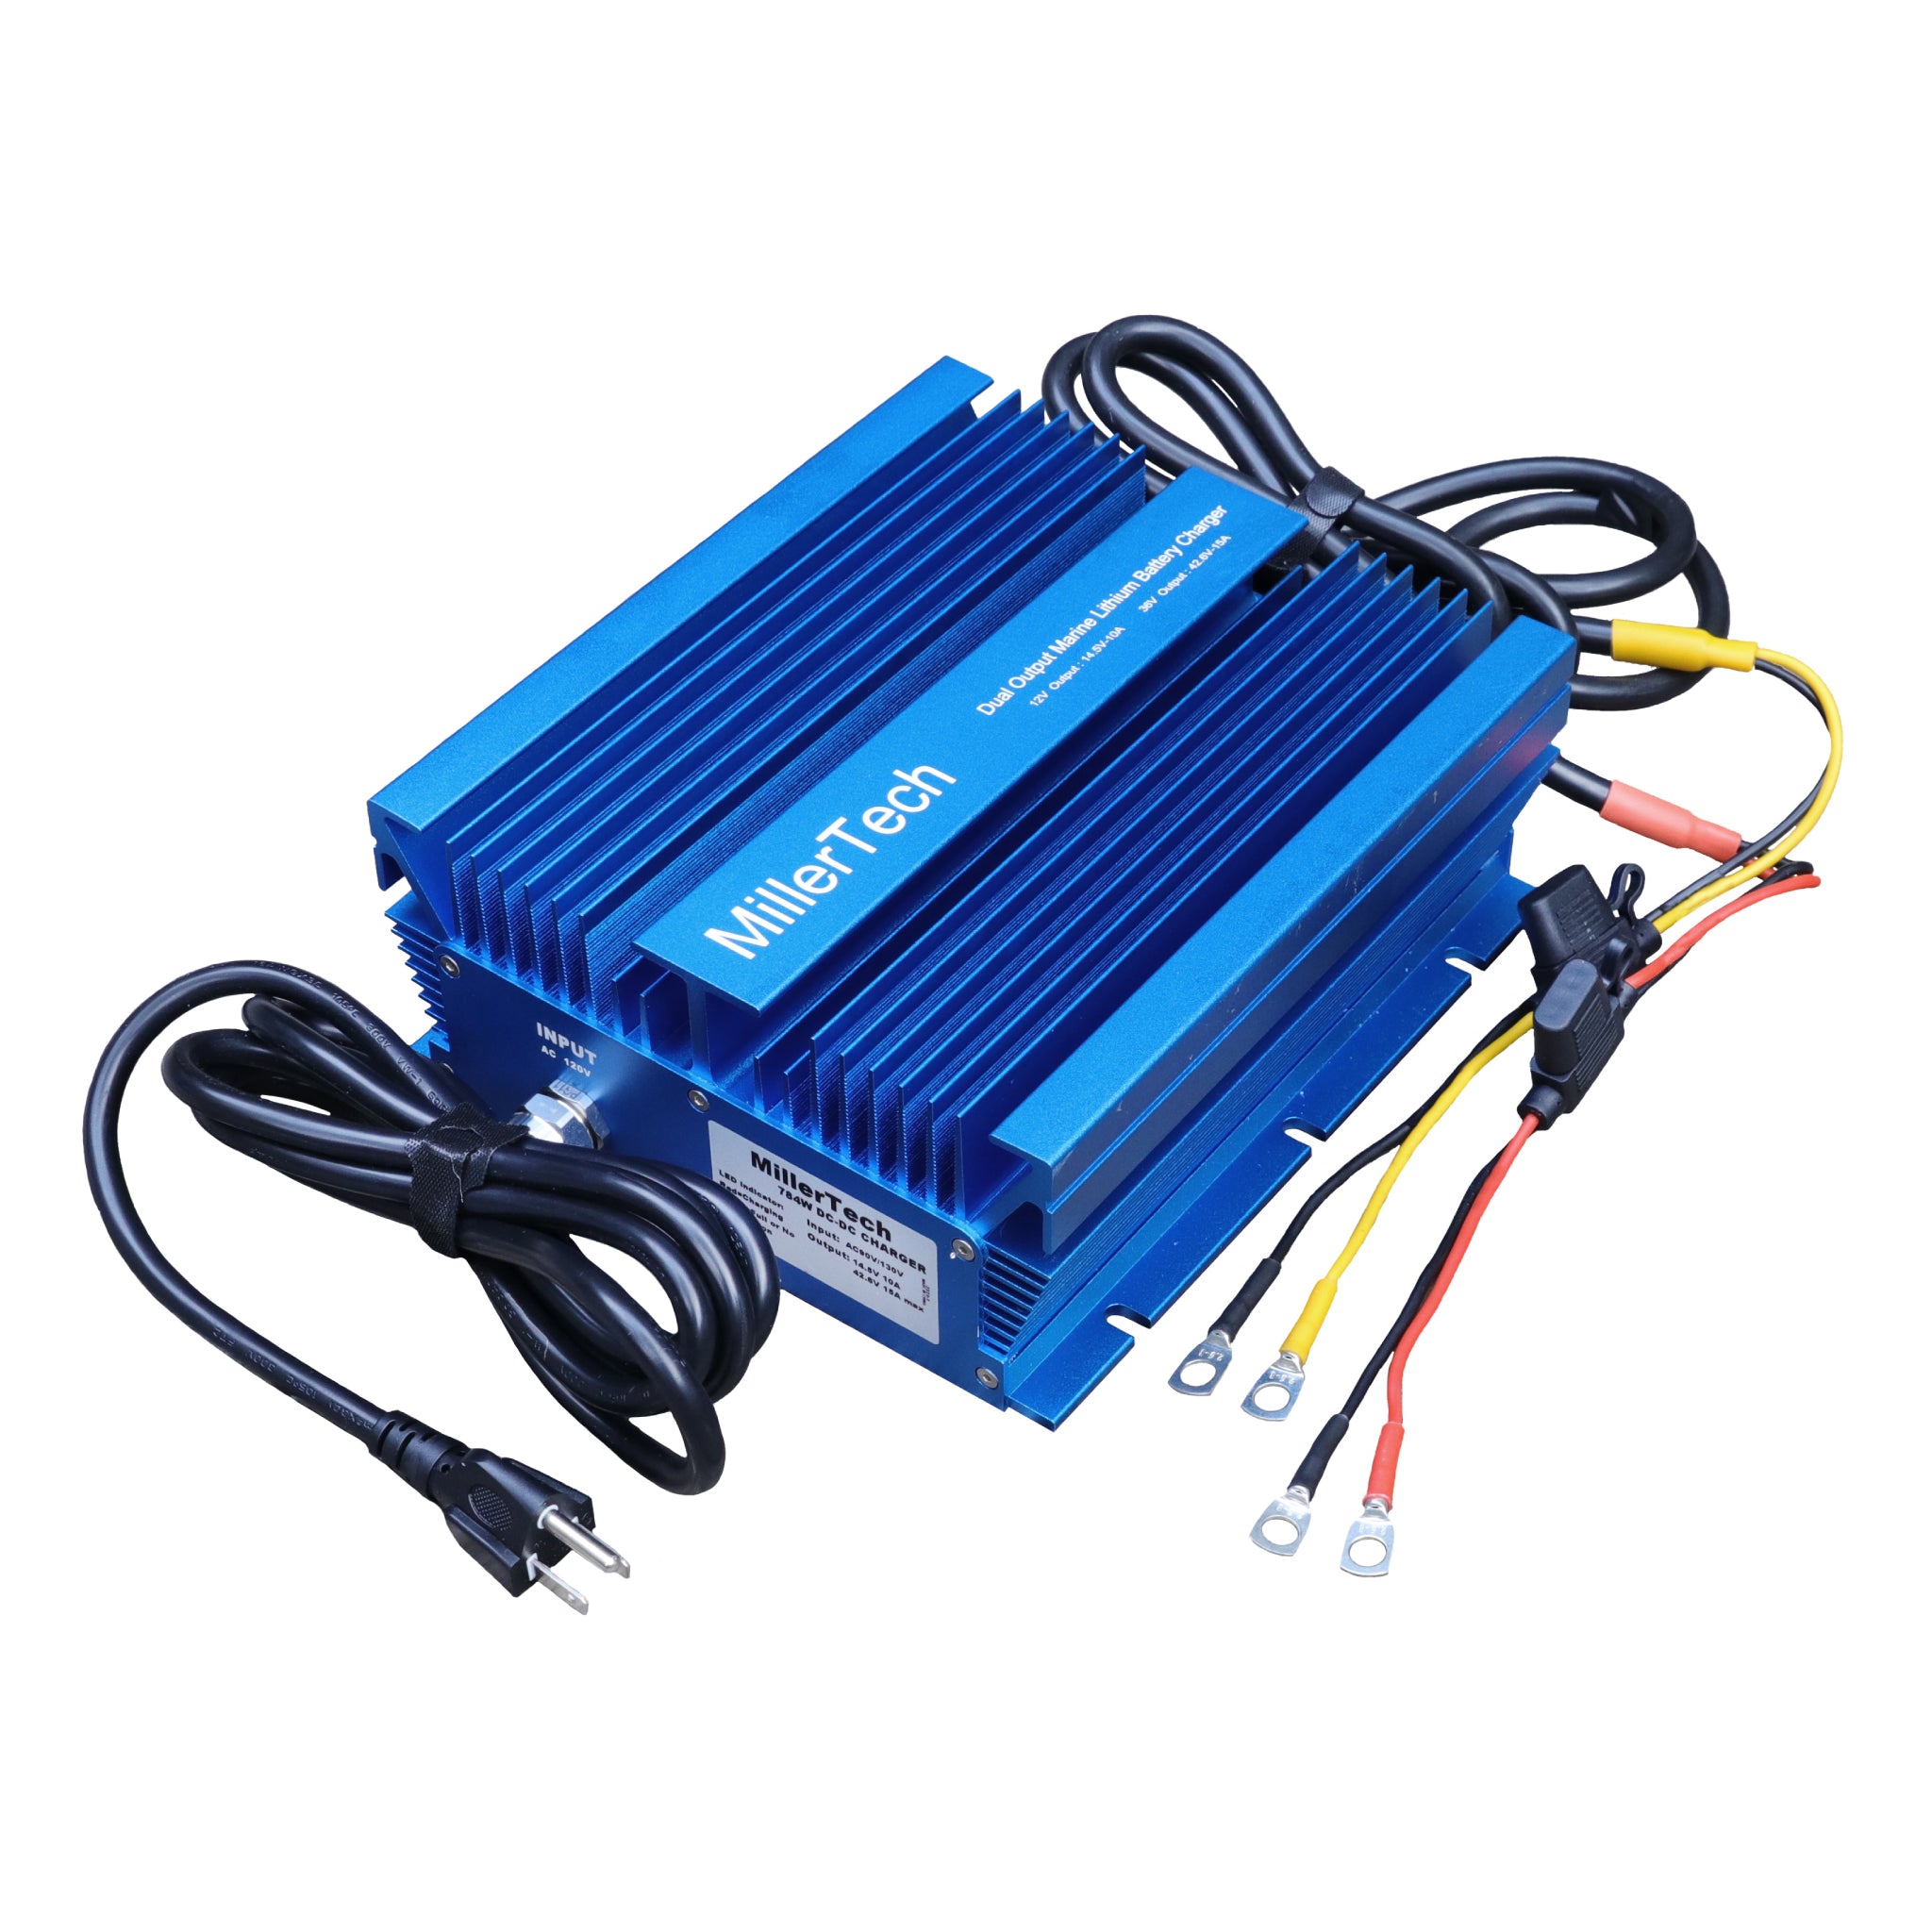 MillerTech 12V 10A Lithium Iron Phosphate Battery Charger (1210C)